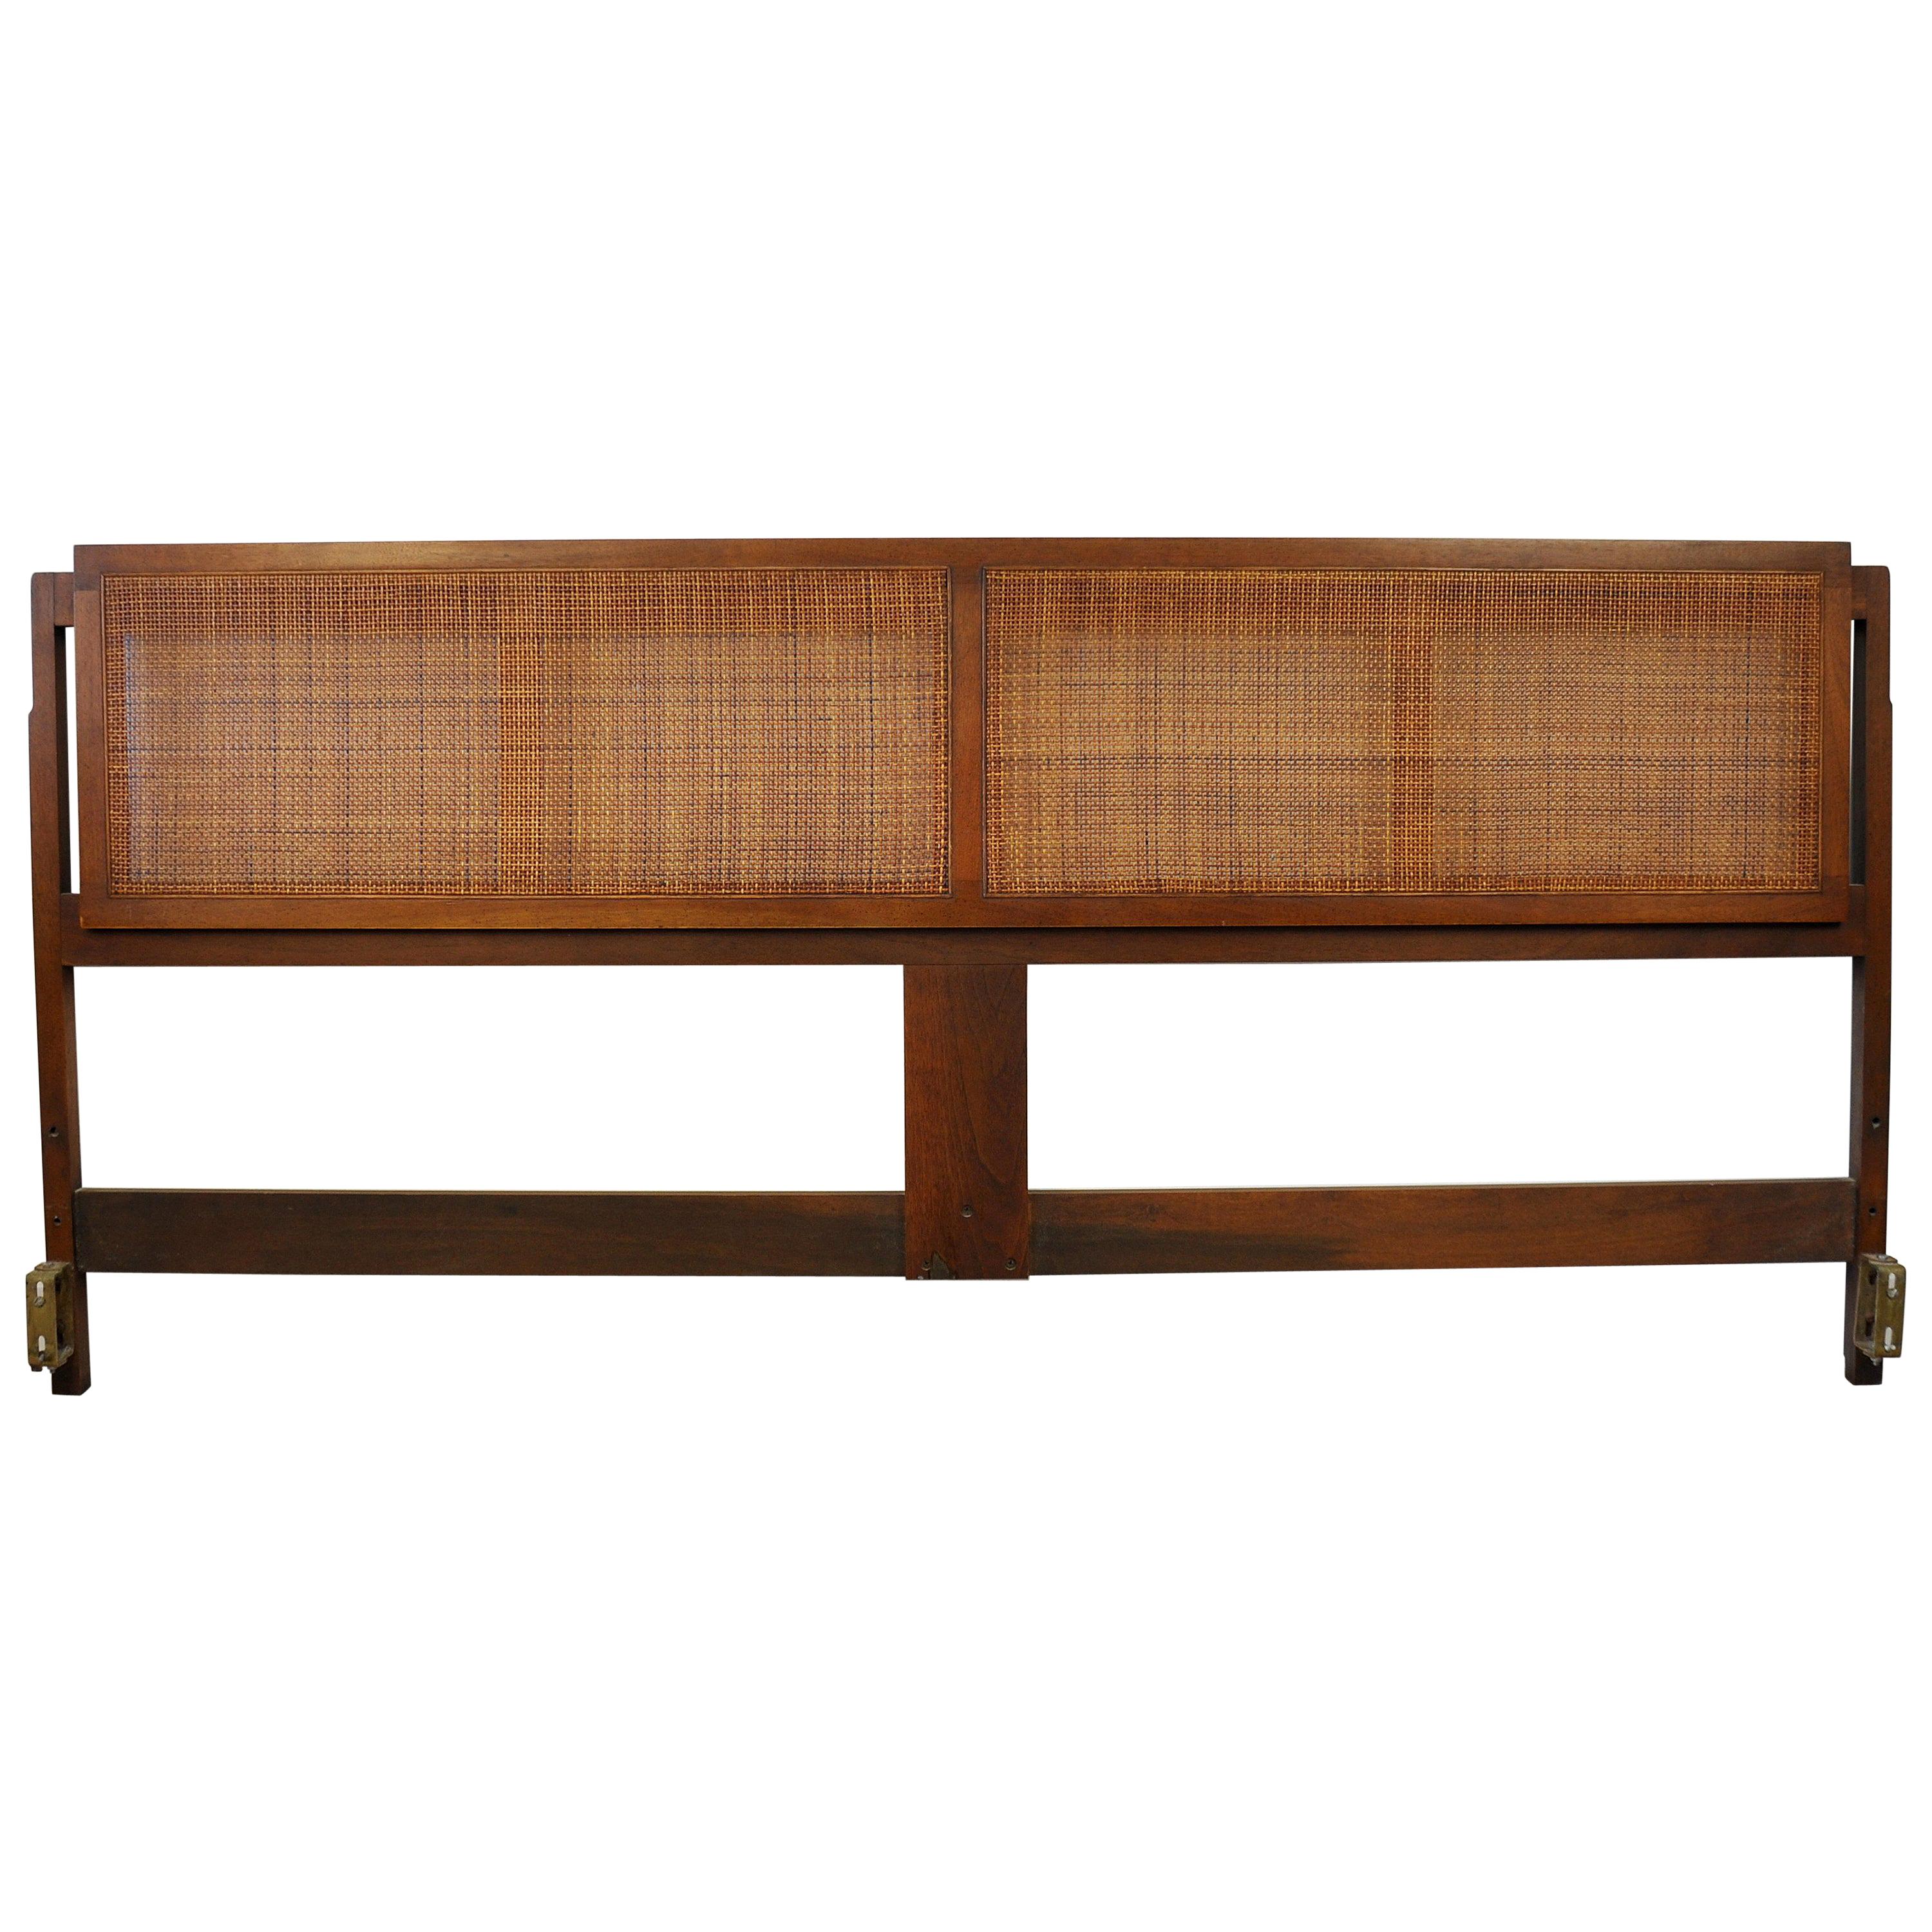 Jack Cartwright for Founders Walnut and Cane King Size Headboard